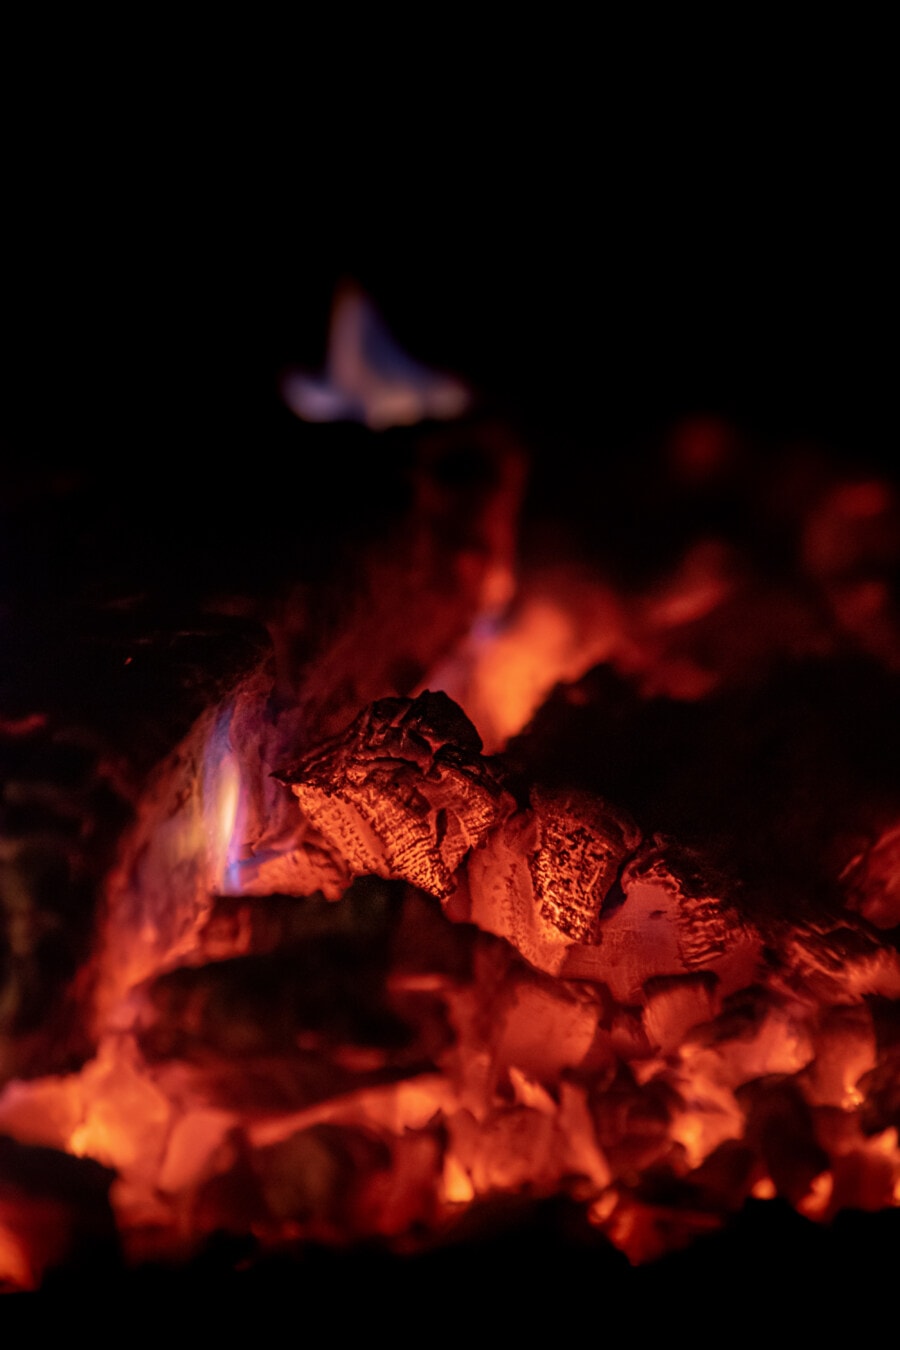 ignite, close-up, fire, firewood, flames, charcoal, darkness, night, campfire, burn